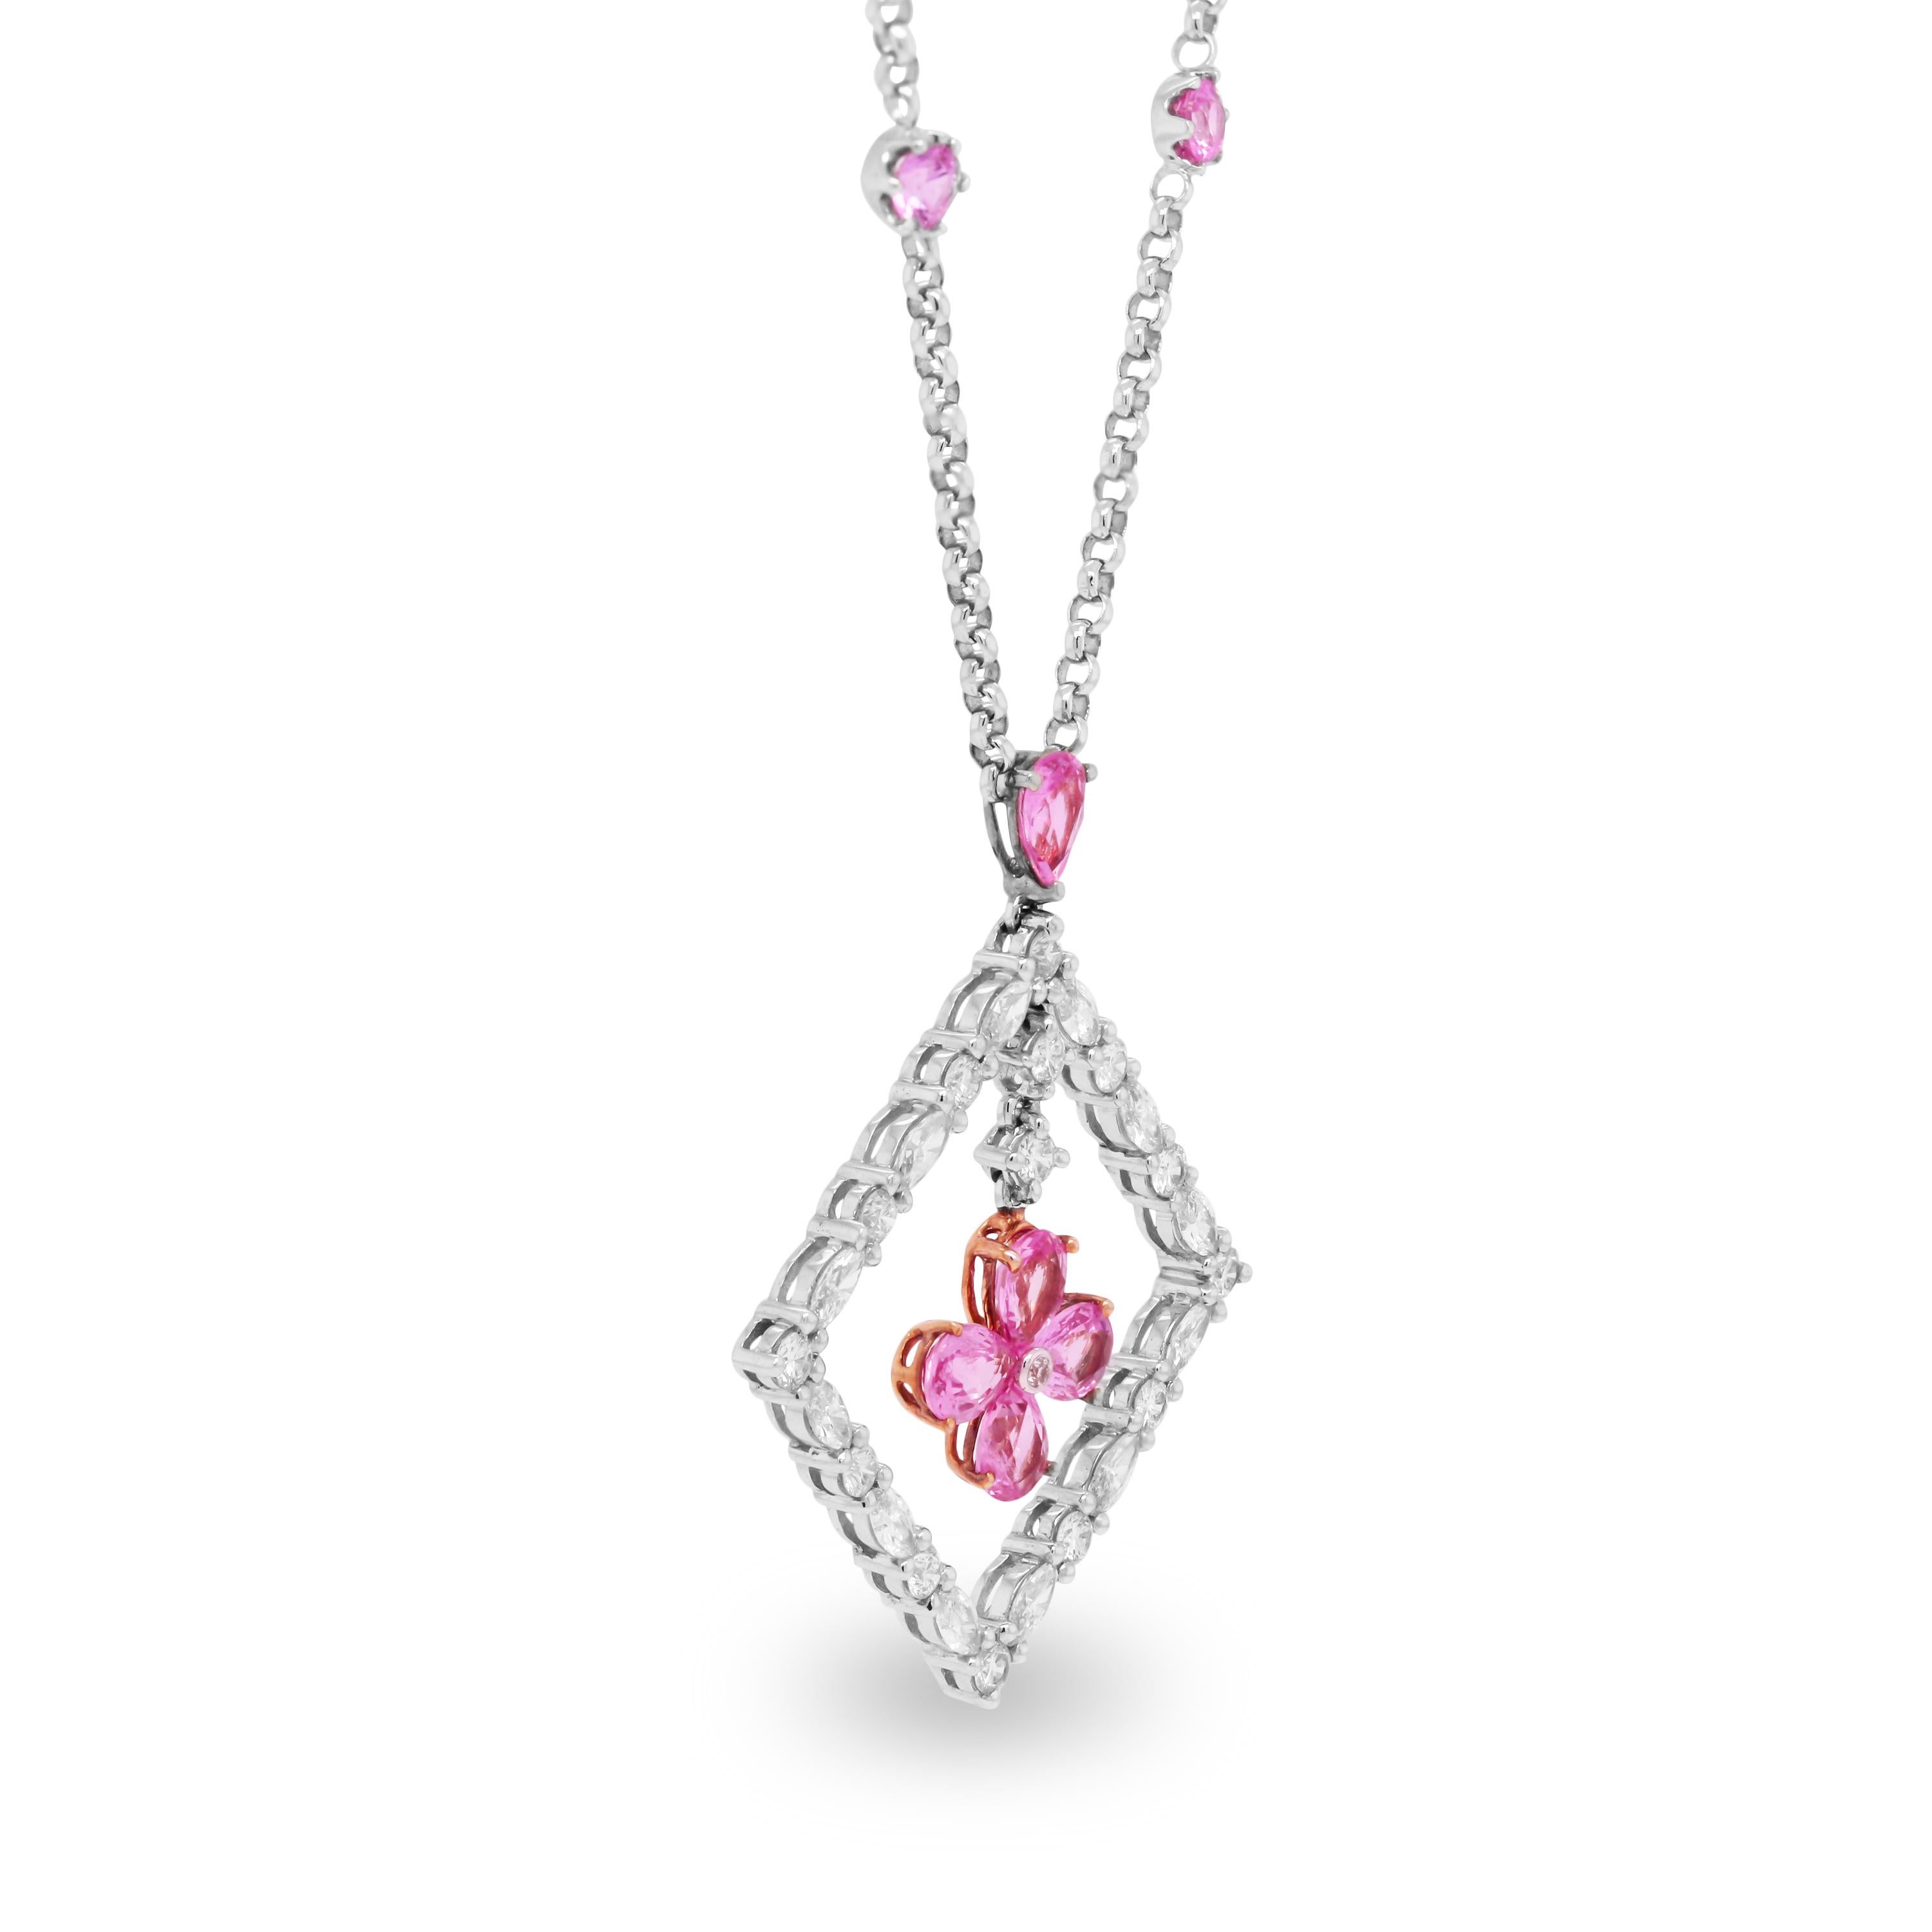 18k White Gold and Diamond Square Pendant Necklace with Pink Sapphires

This fun piece features 4 bezel set pink sapphires on the chain that lead to the pendant. The pendant has four pear shape pink sapphires in the center along with round and